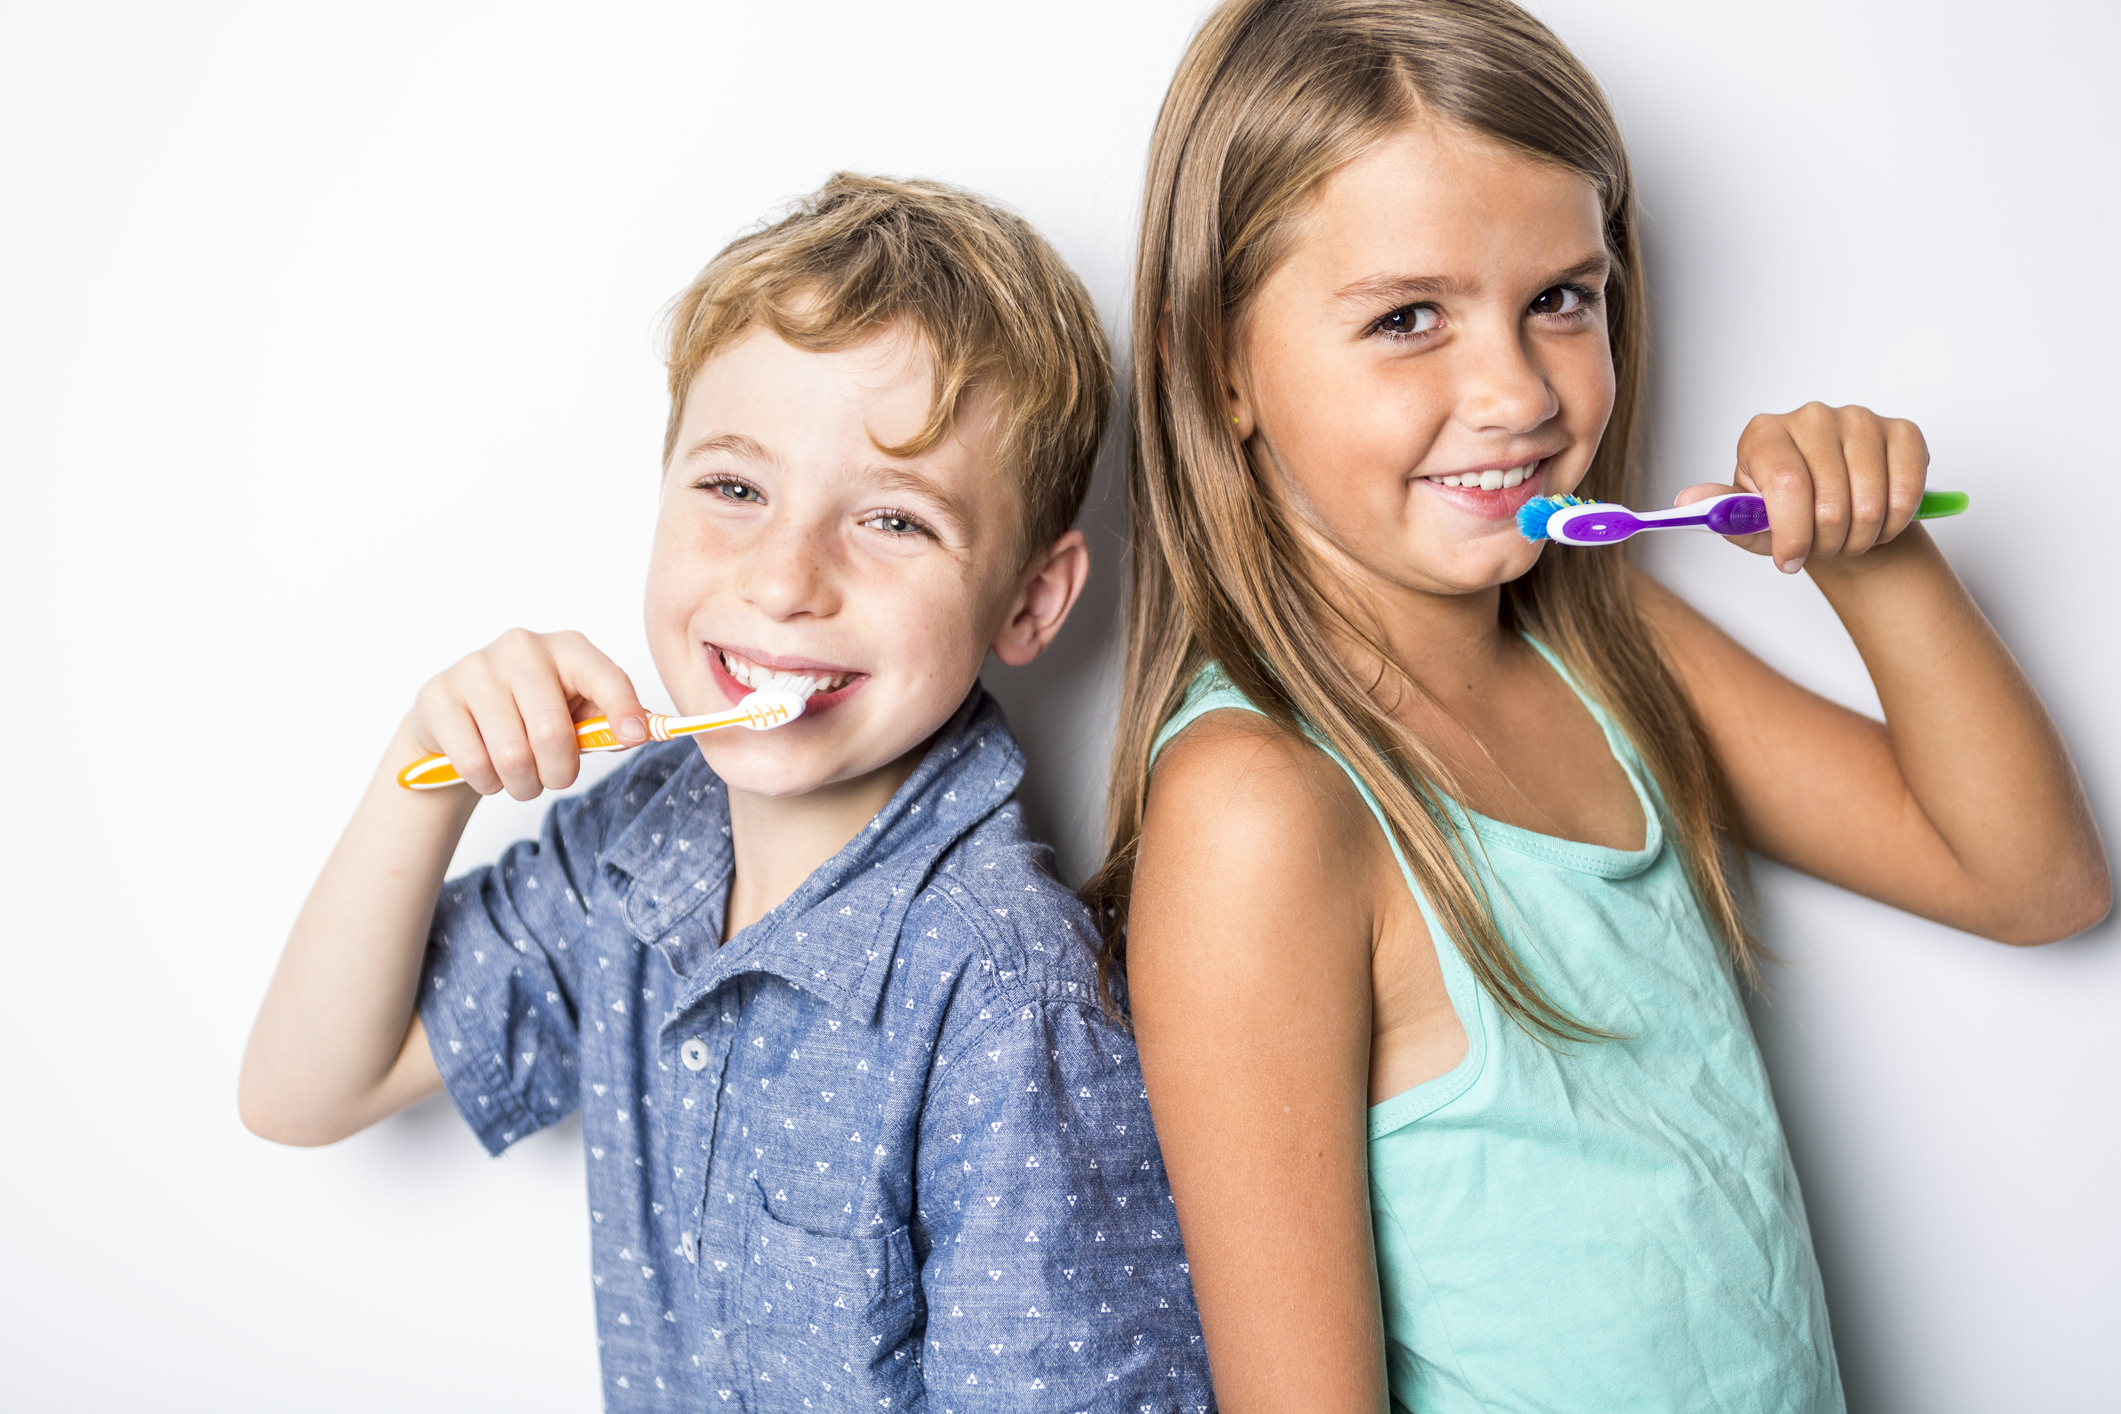 Two children perform dental care, brushing their teeth and smiling.